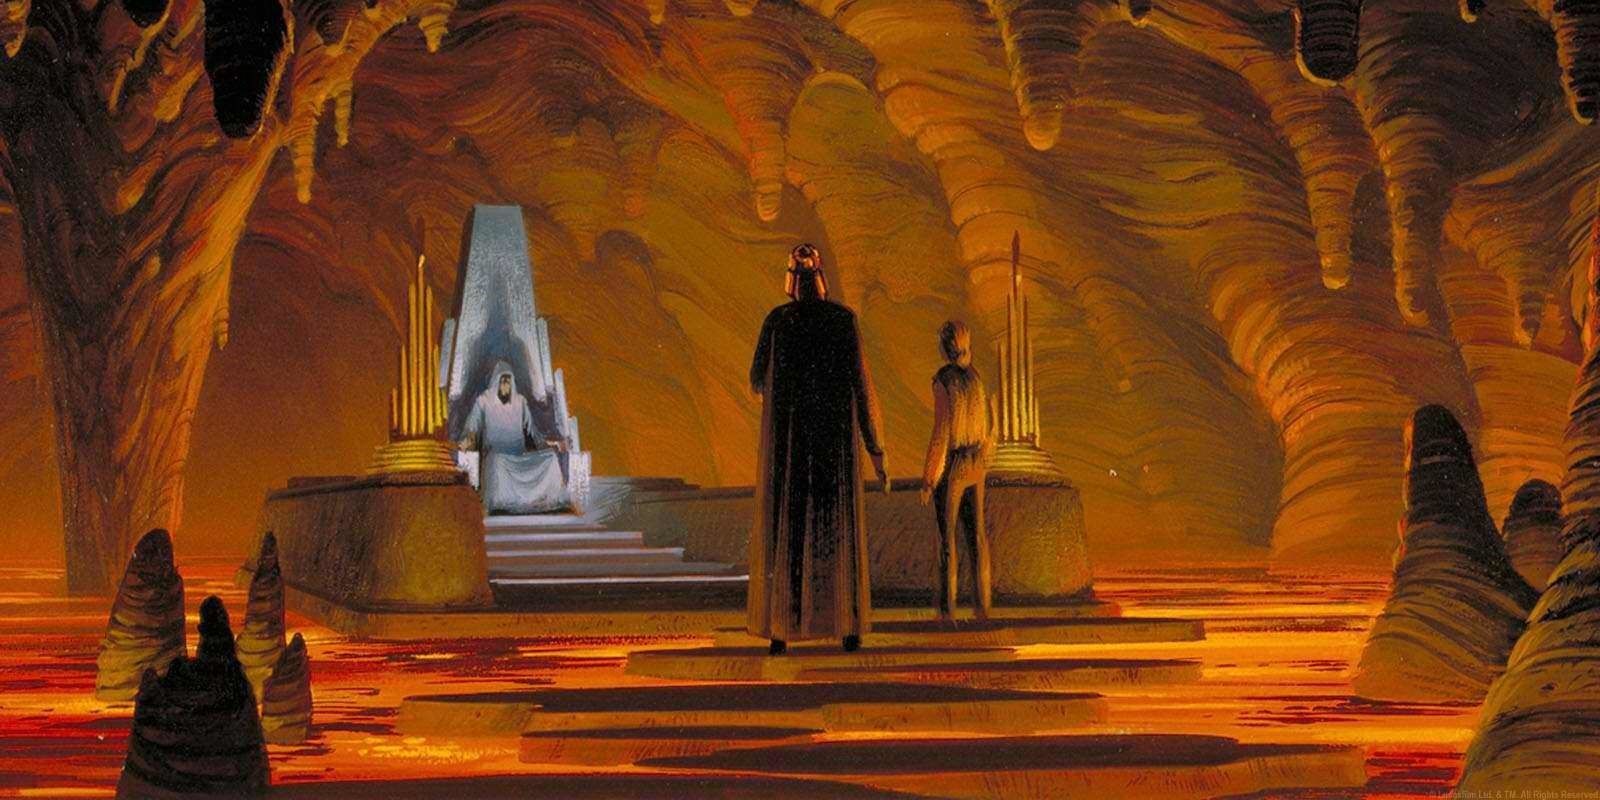 Concept art for Emperor Palpatine's throne room in Return of the Jedi, which was depicted as a chair in a cavern filled with lava, by Ralph McQuarrie